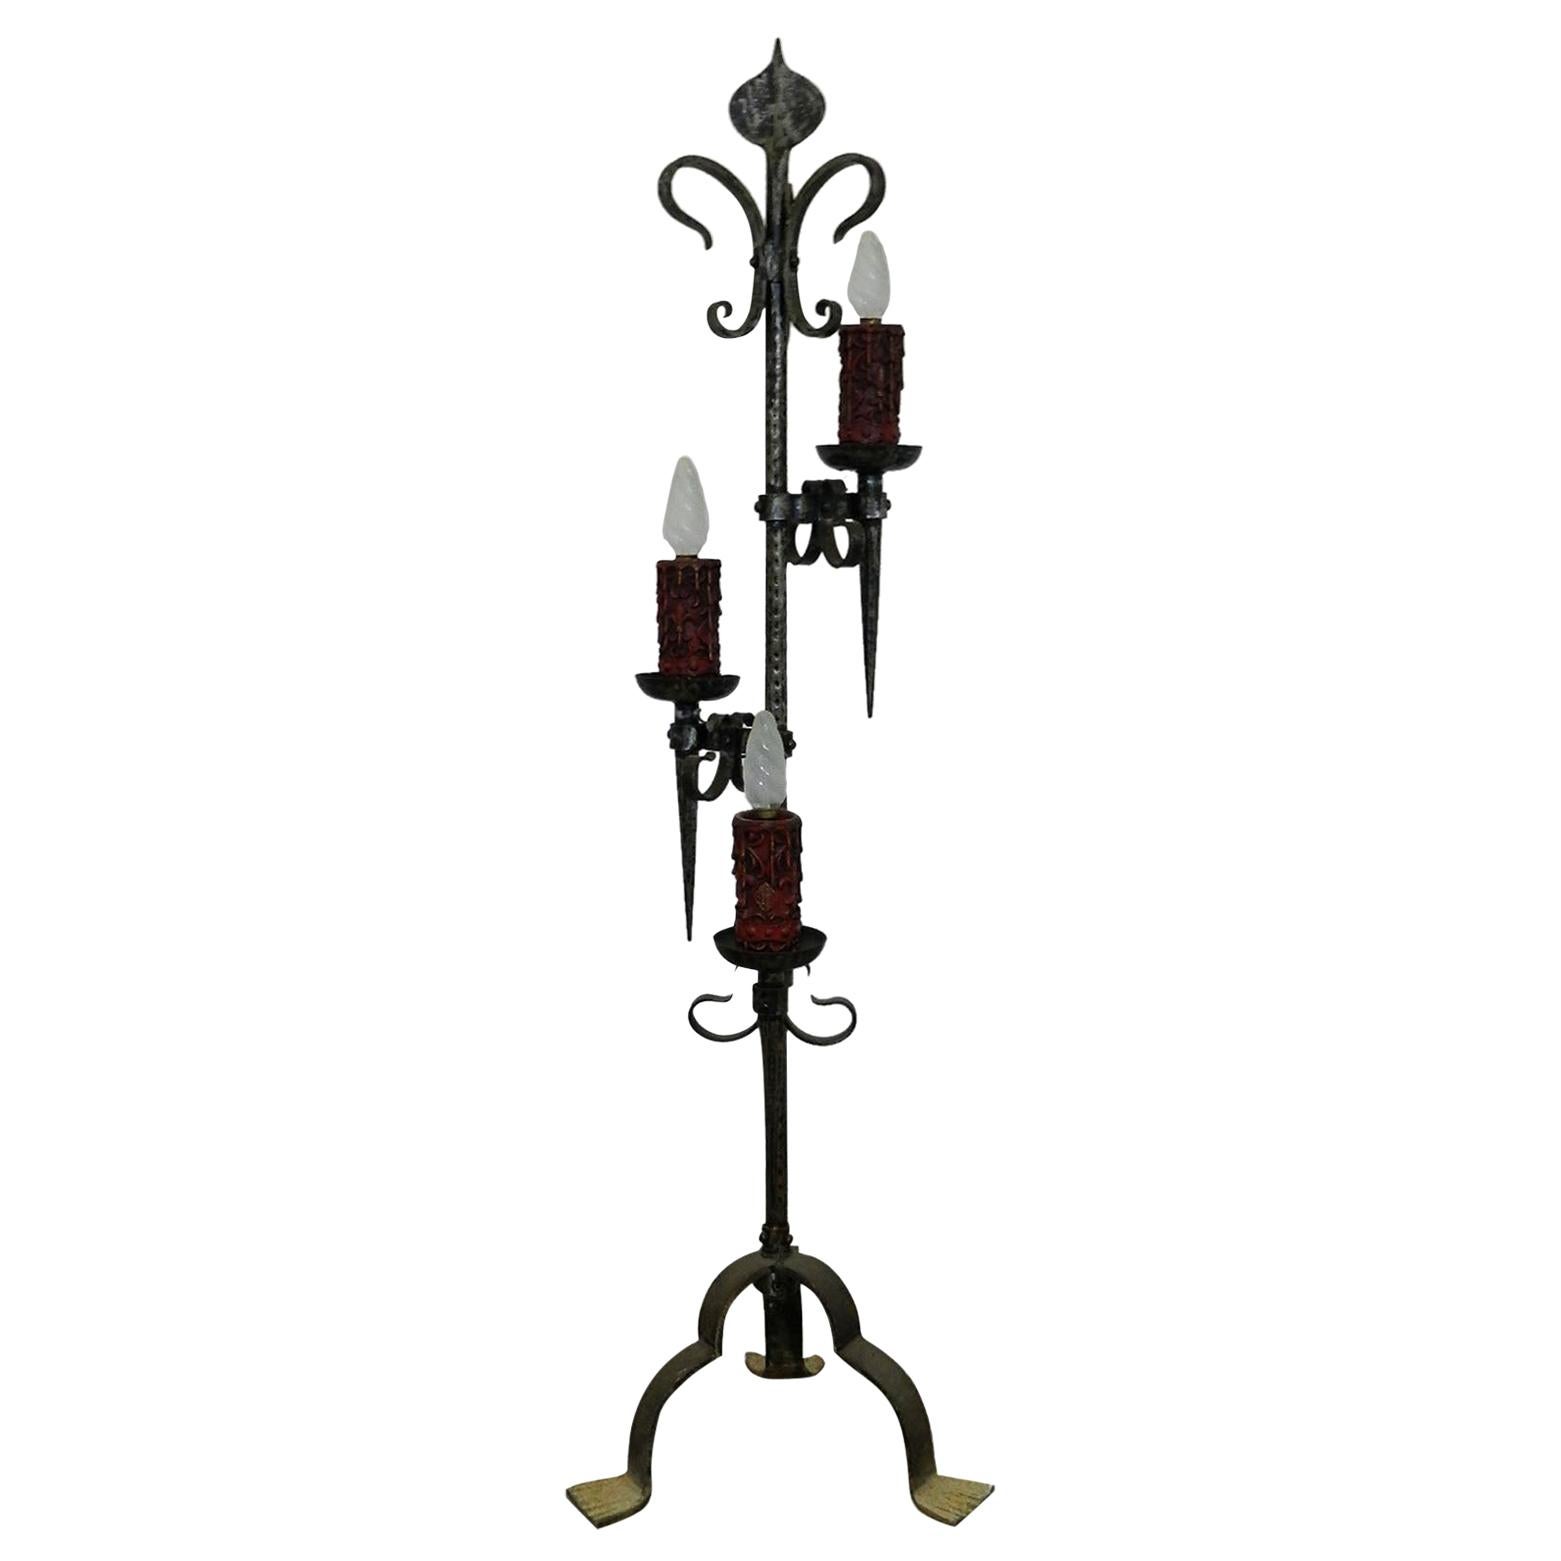 Spanish Wrought Iron Floor Lamp Artisan Made One of a Kind, circa 1960